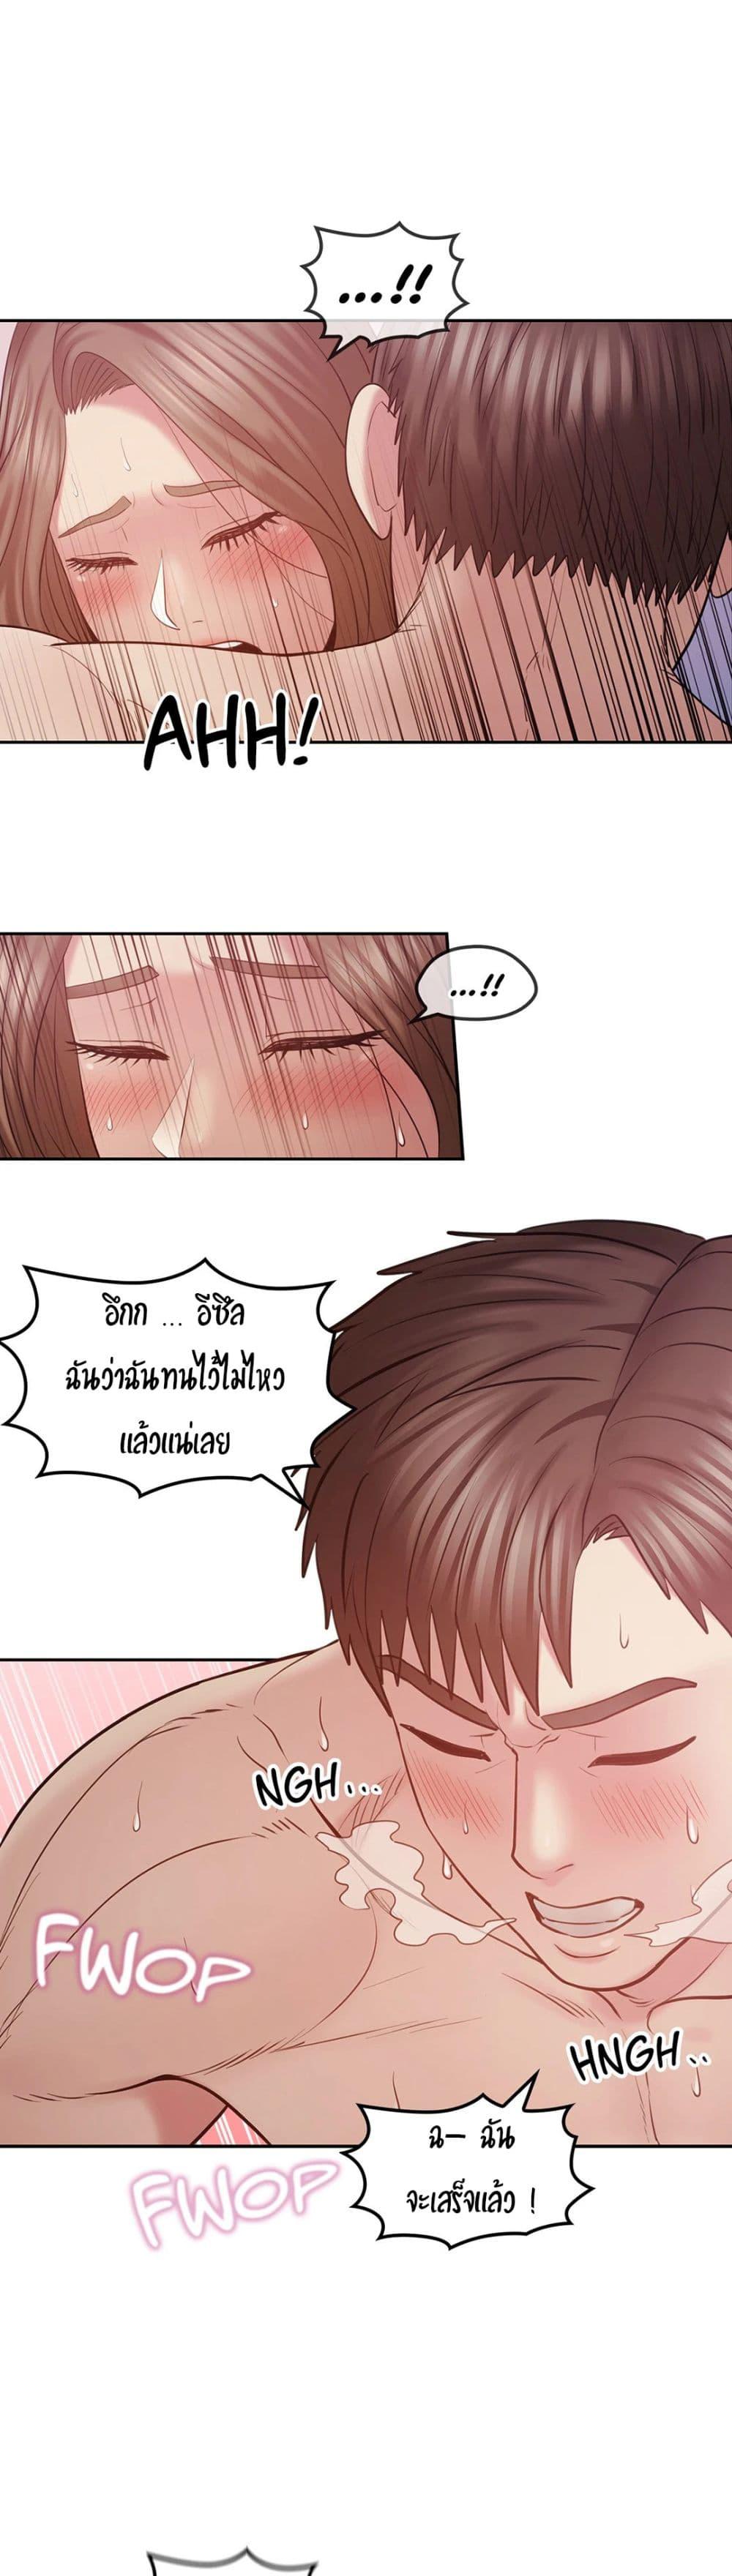 Sexual Consulting 1 ภาพ 46